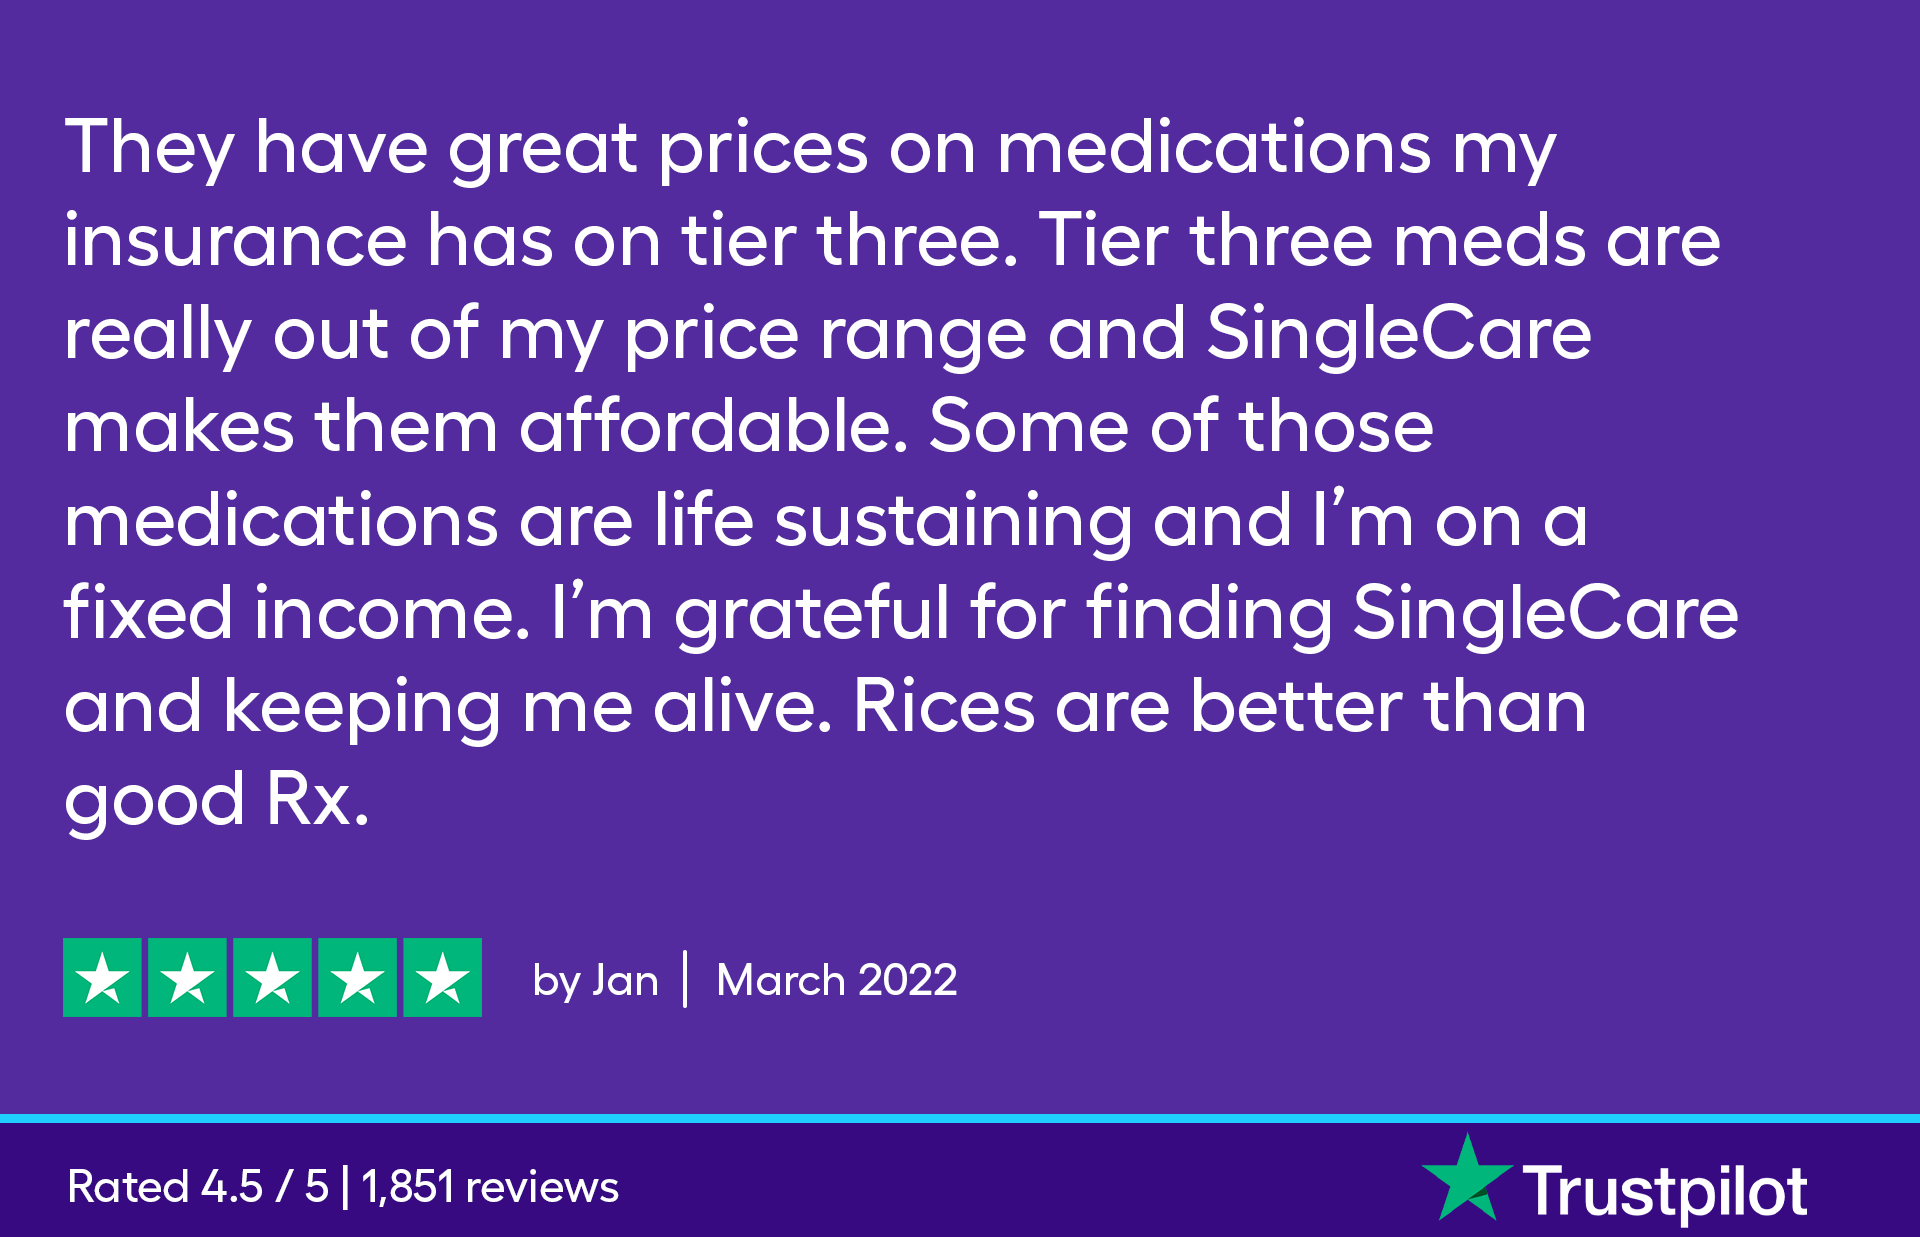 They have great prices on medications my insurance has on tier three. Tier three meds are really out of my price range and SingleCare makes them affordable. Some of those medications are life sustaining and I’m on a fixed income. I’m grateful for finding SingleCare to help keeping me alive. Prices are better than good Rx. 